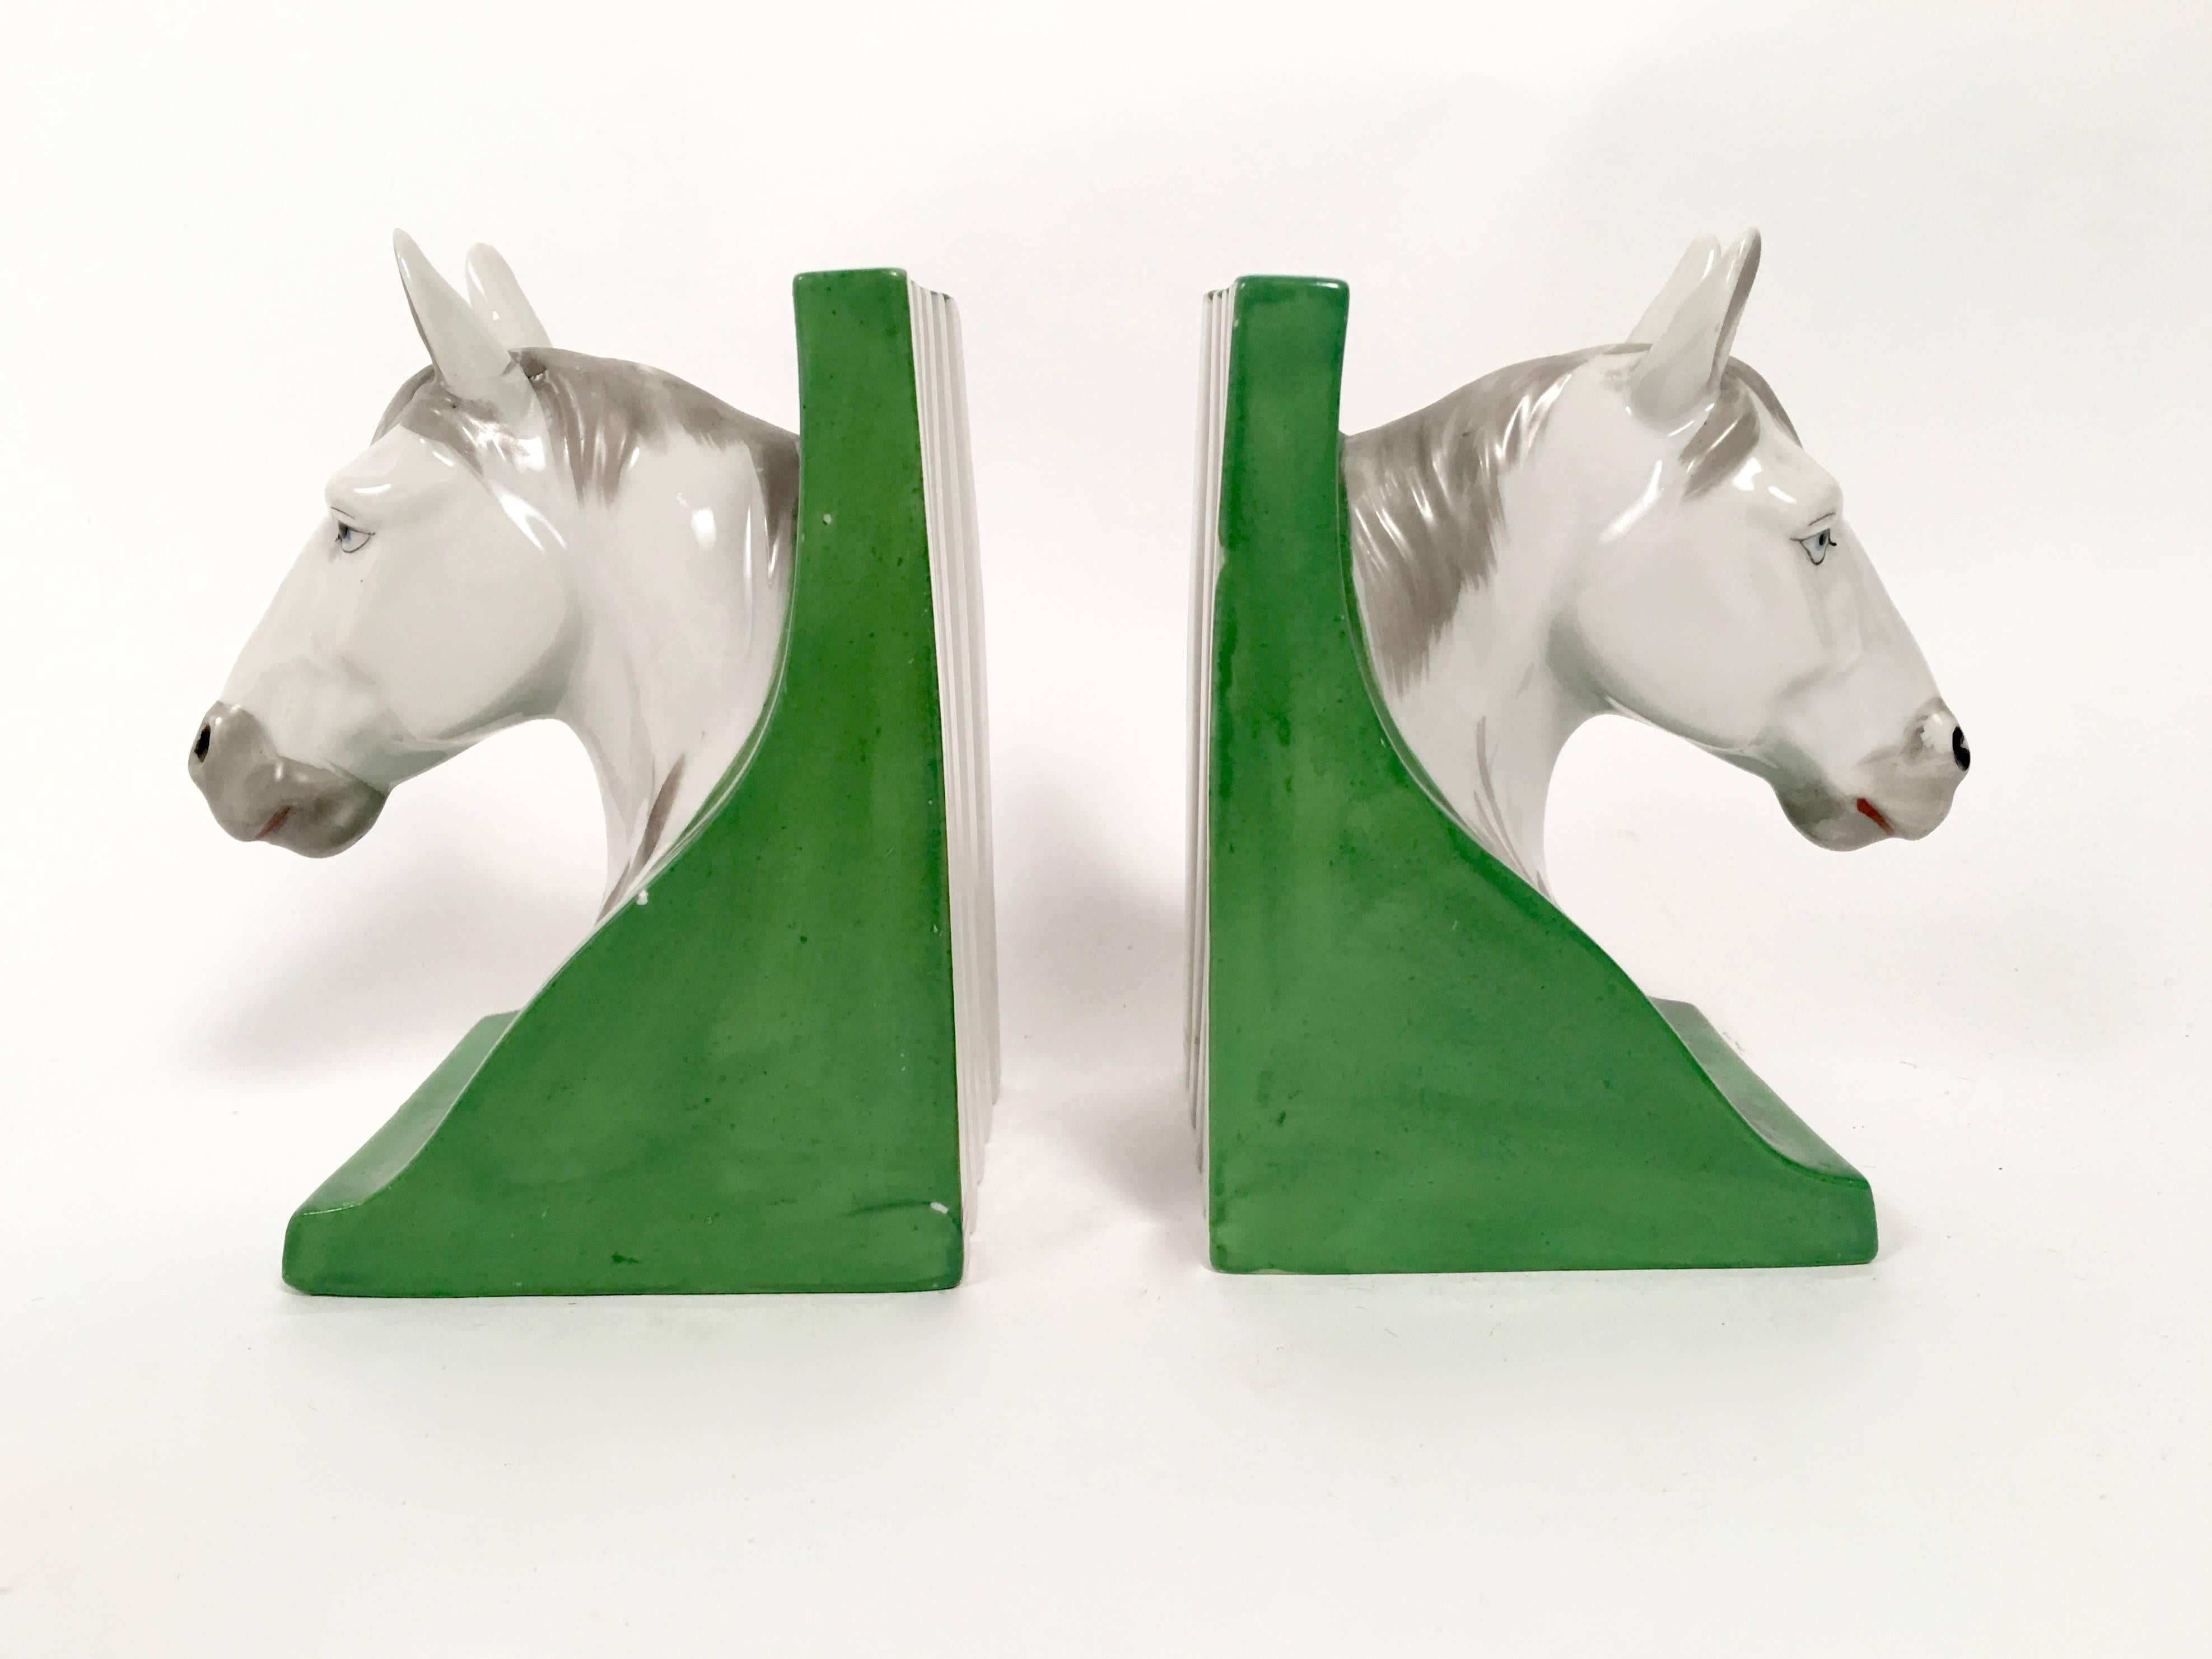 A charming pair of hand-painted ceramic horse head bookends, the expressive white horses with grey manes and blue eyes on emerald green bases.